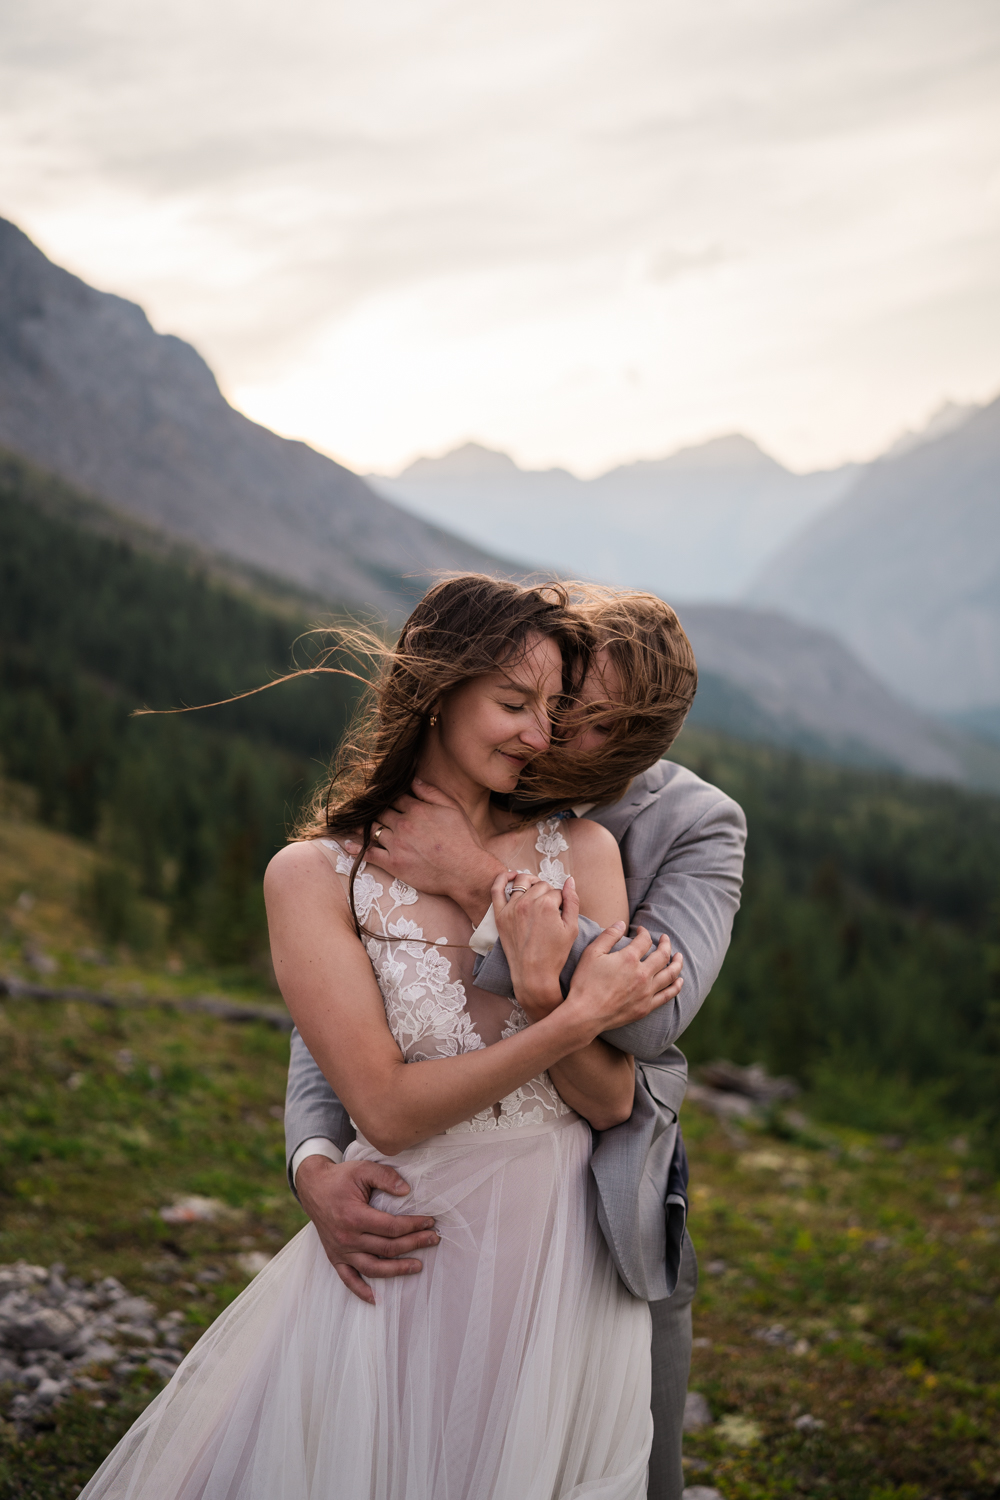 Couples portrait captured against the backdrop of the majestic Alberta mountains during a Kananaskis elopement